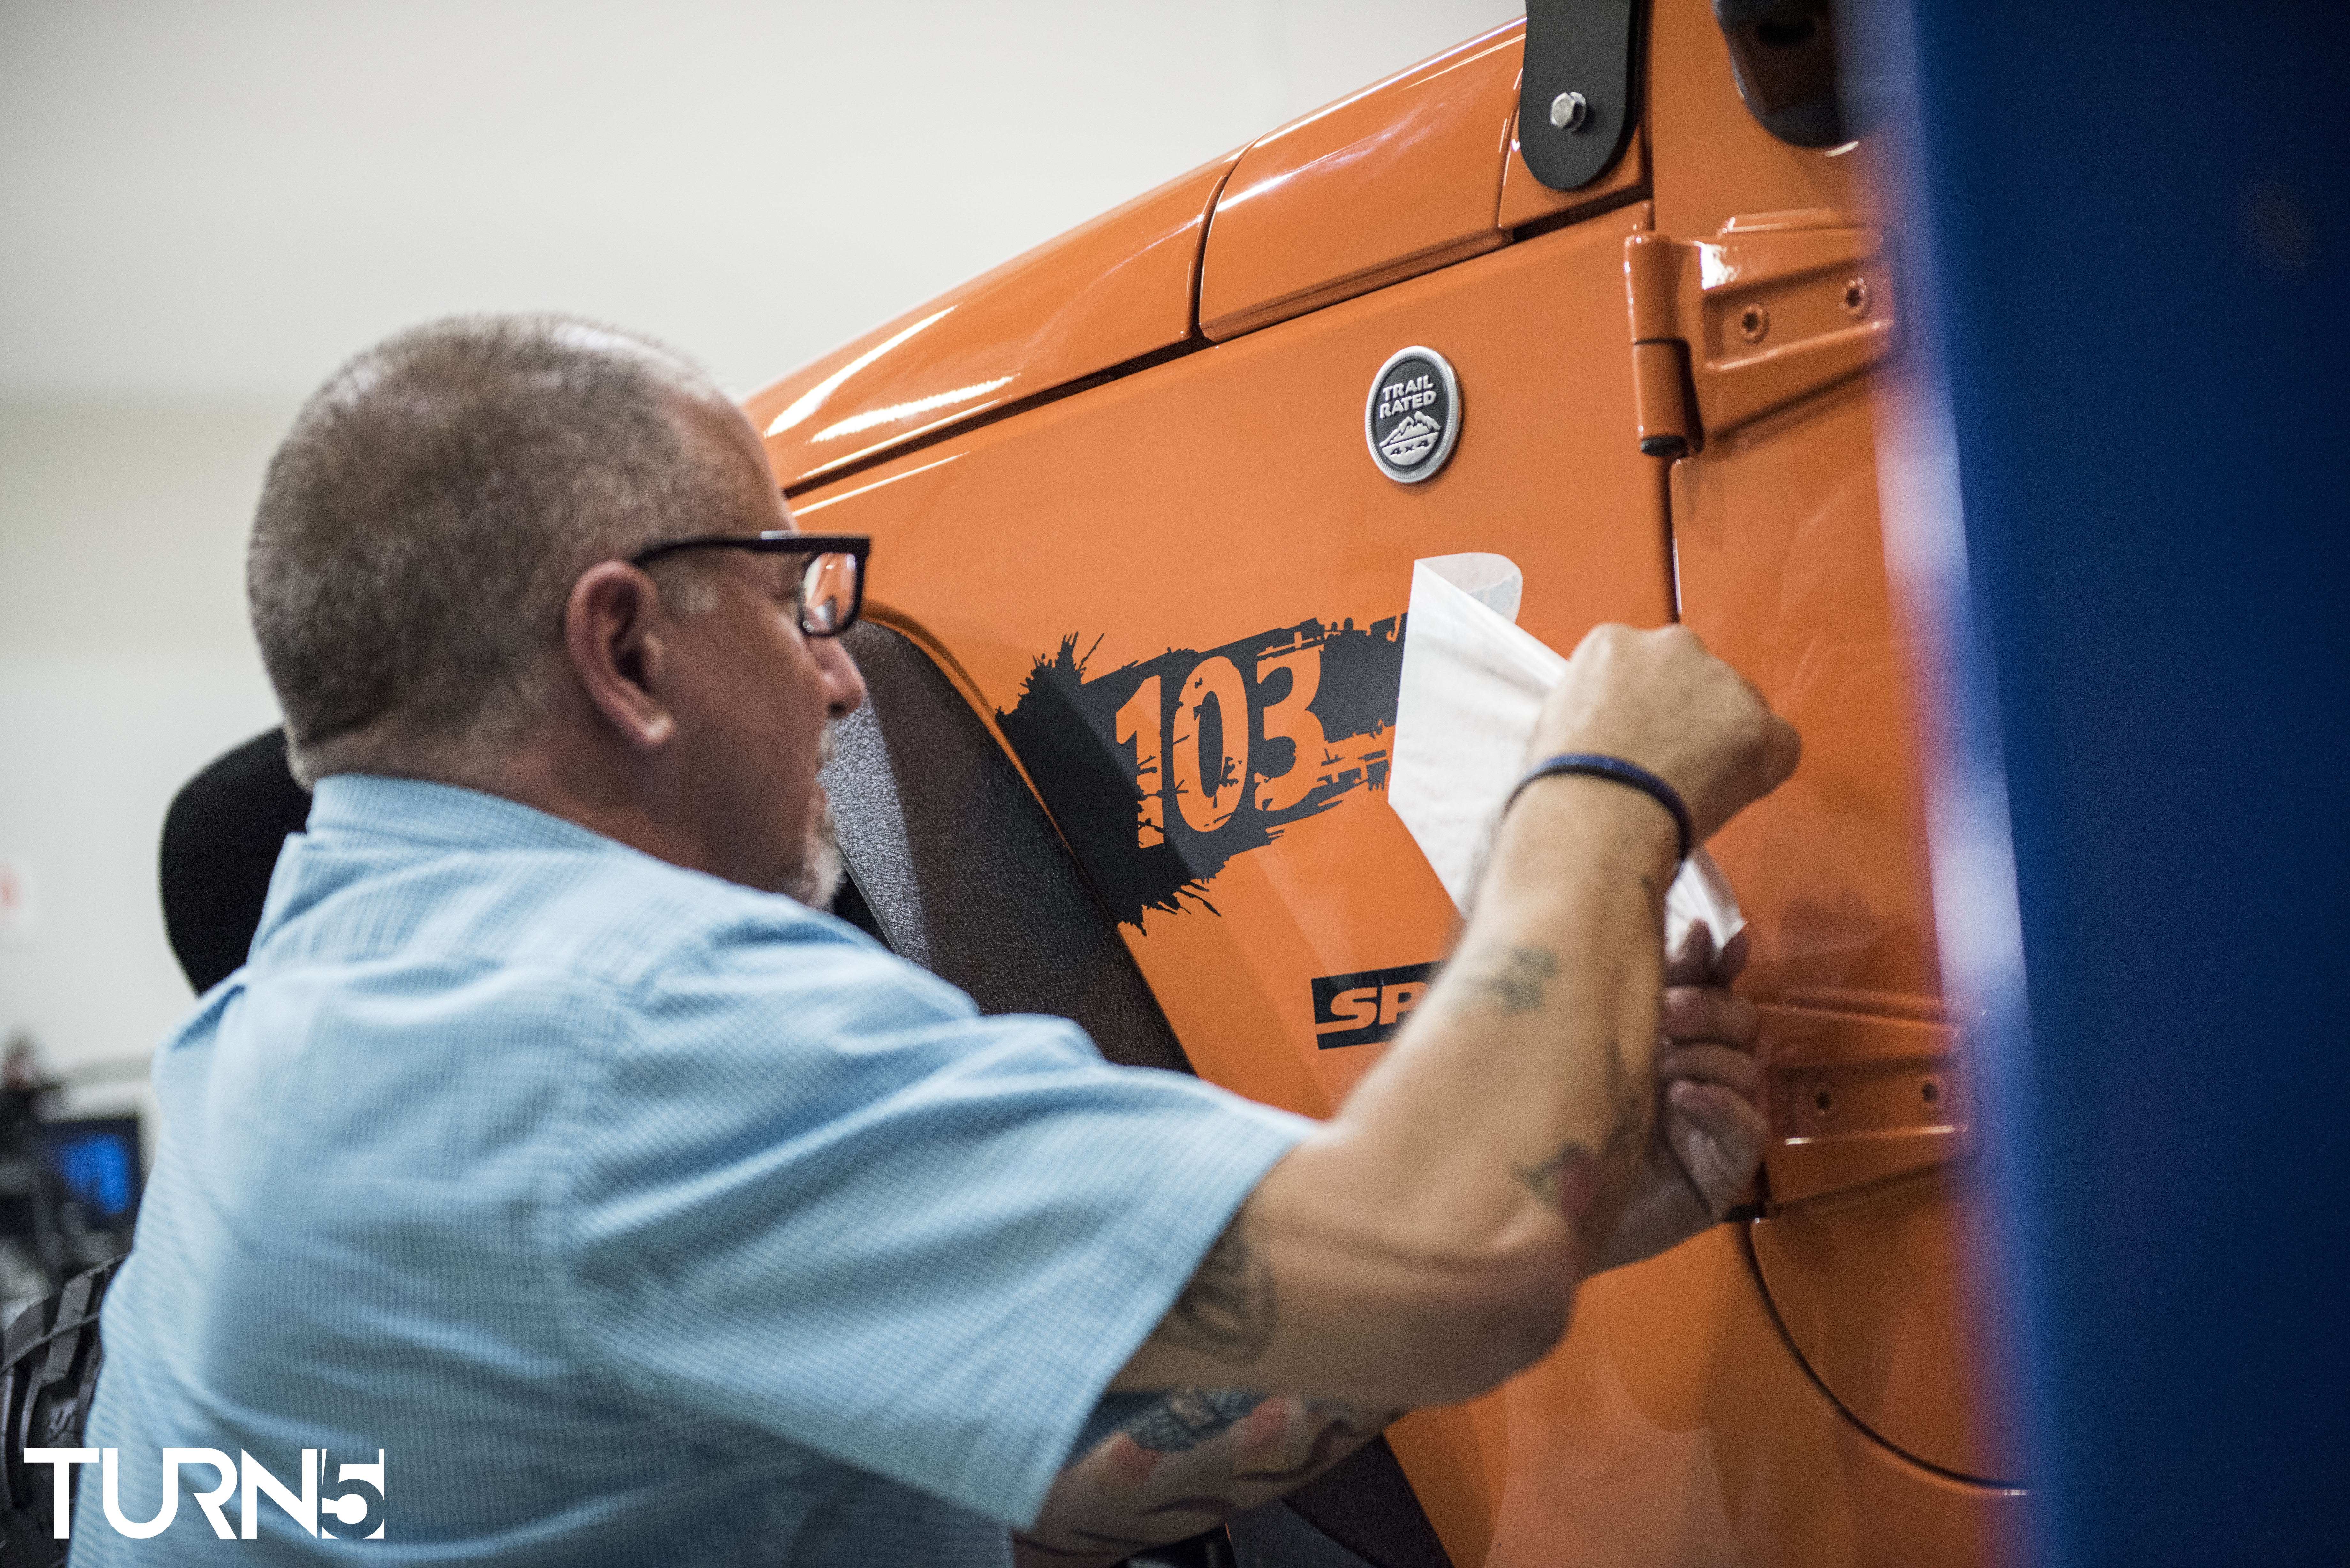 George Dorman, father of Officer Chris Dorman, placing the custom vinyl decal of his son's badge number on the 2012 Jeep Wrangler. (credit: Turn5)